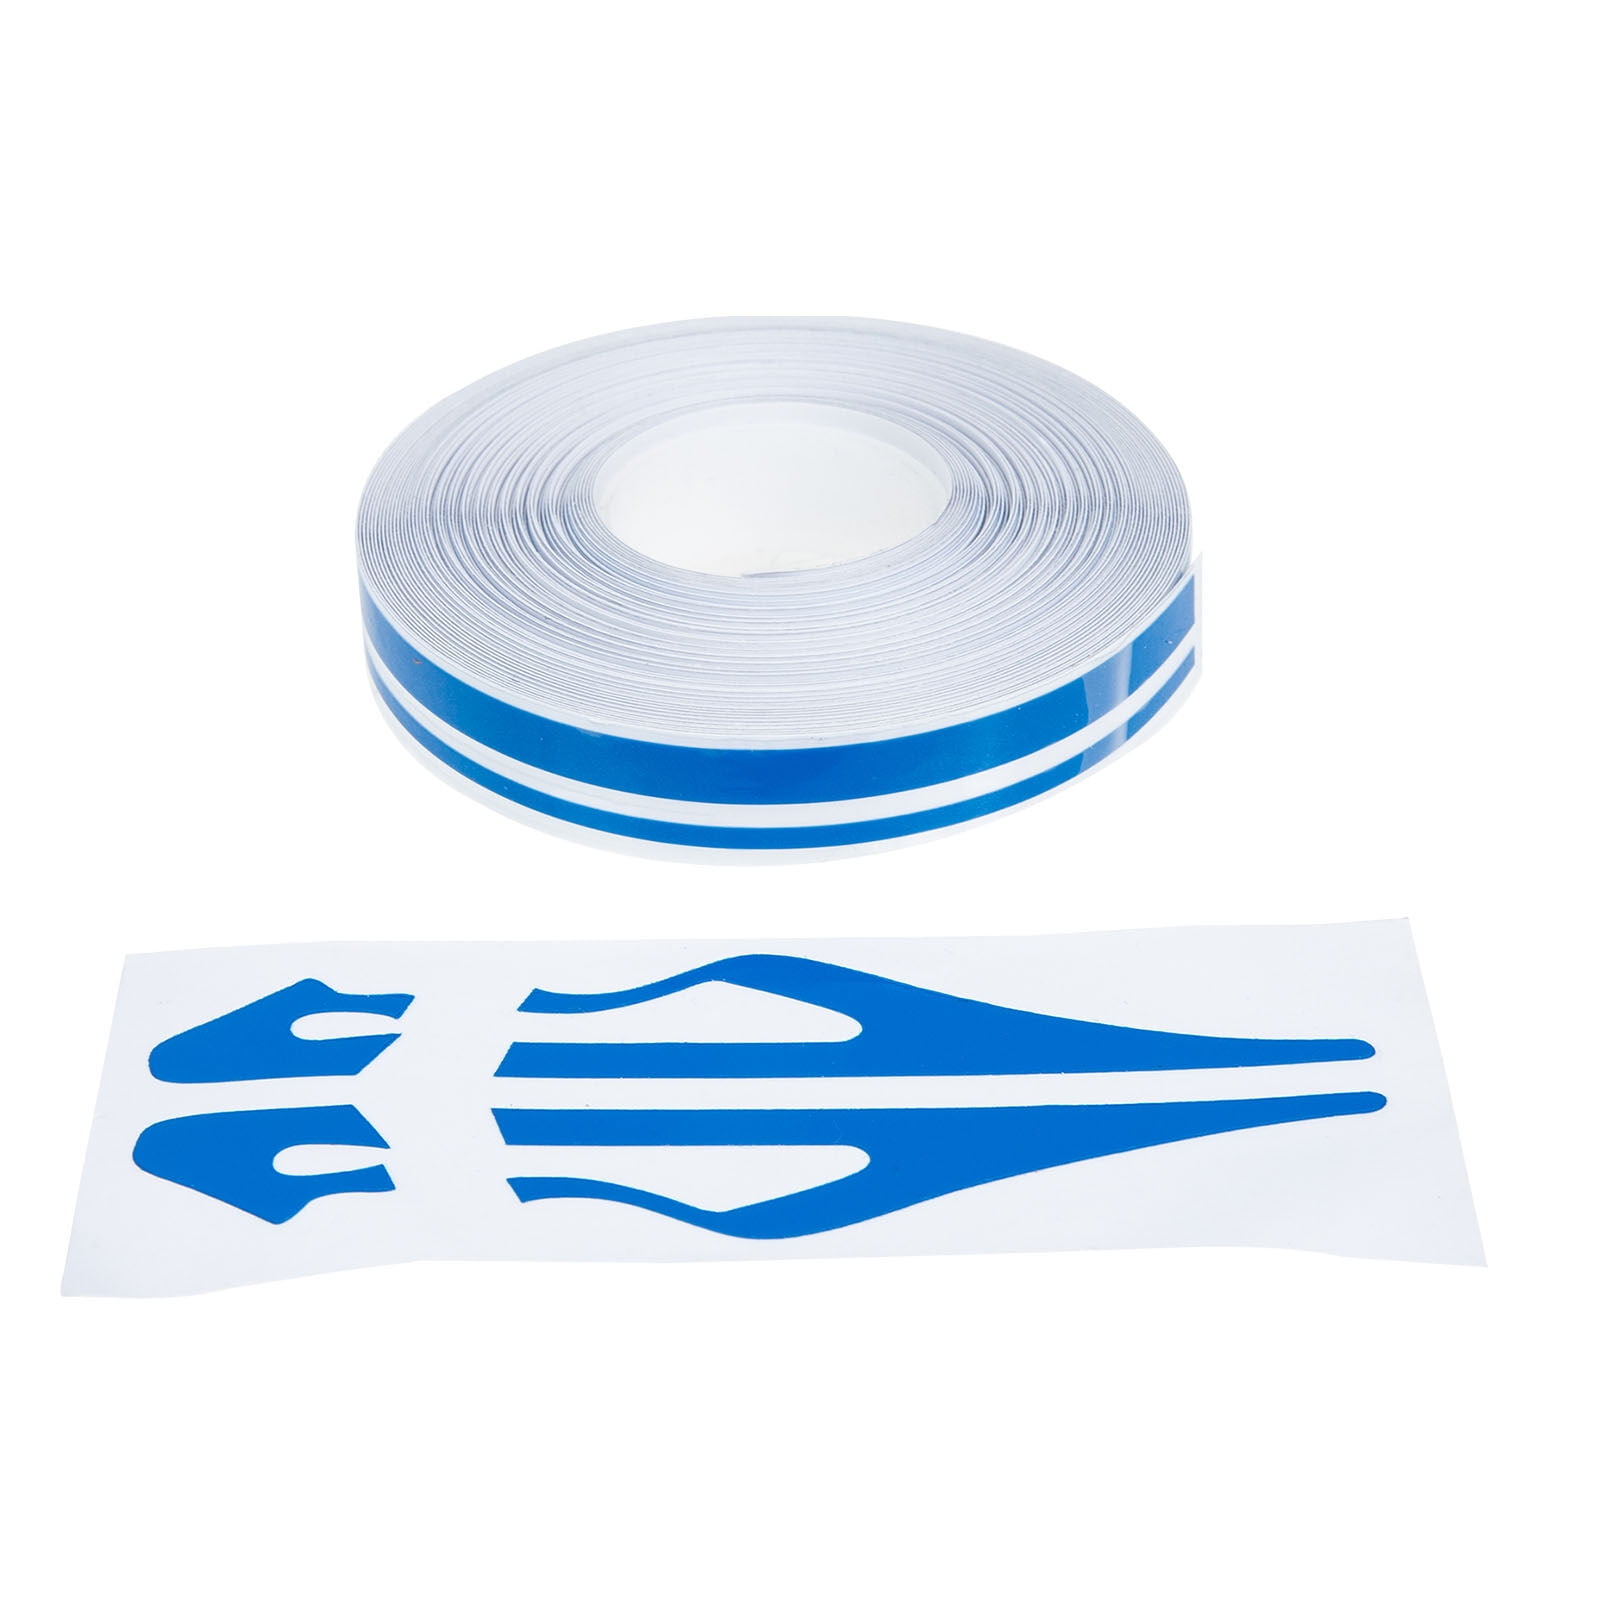  A Beginners Guide To Pinstriping Tape 